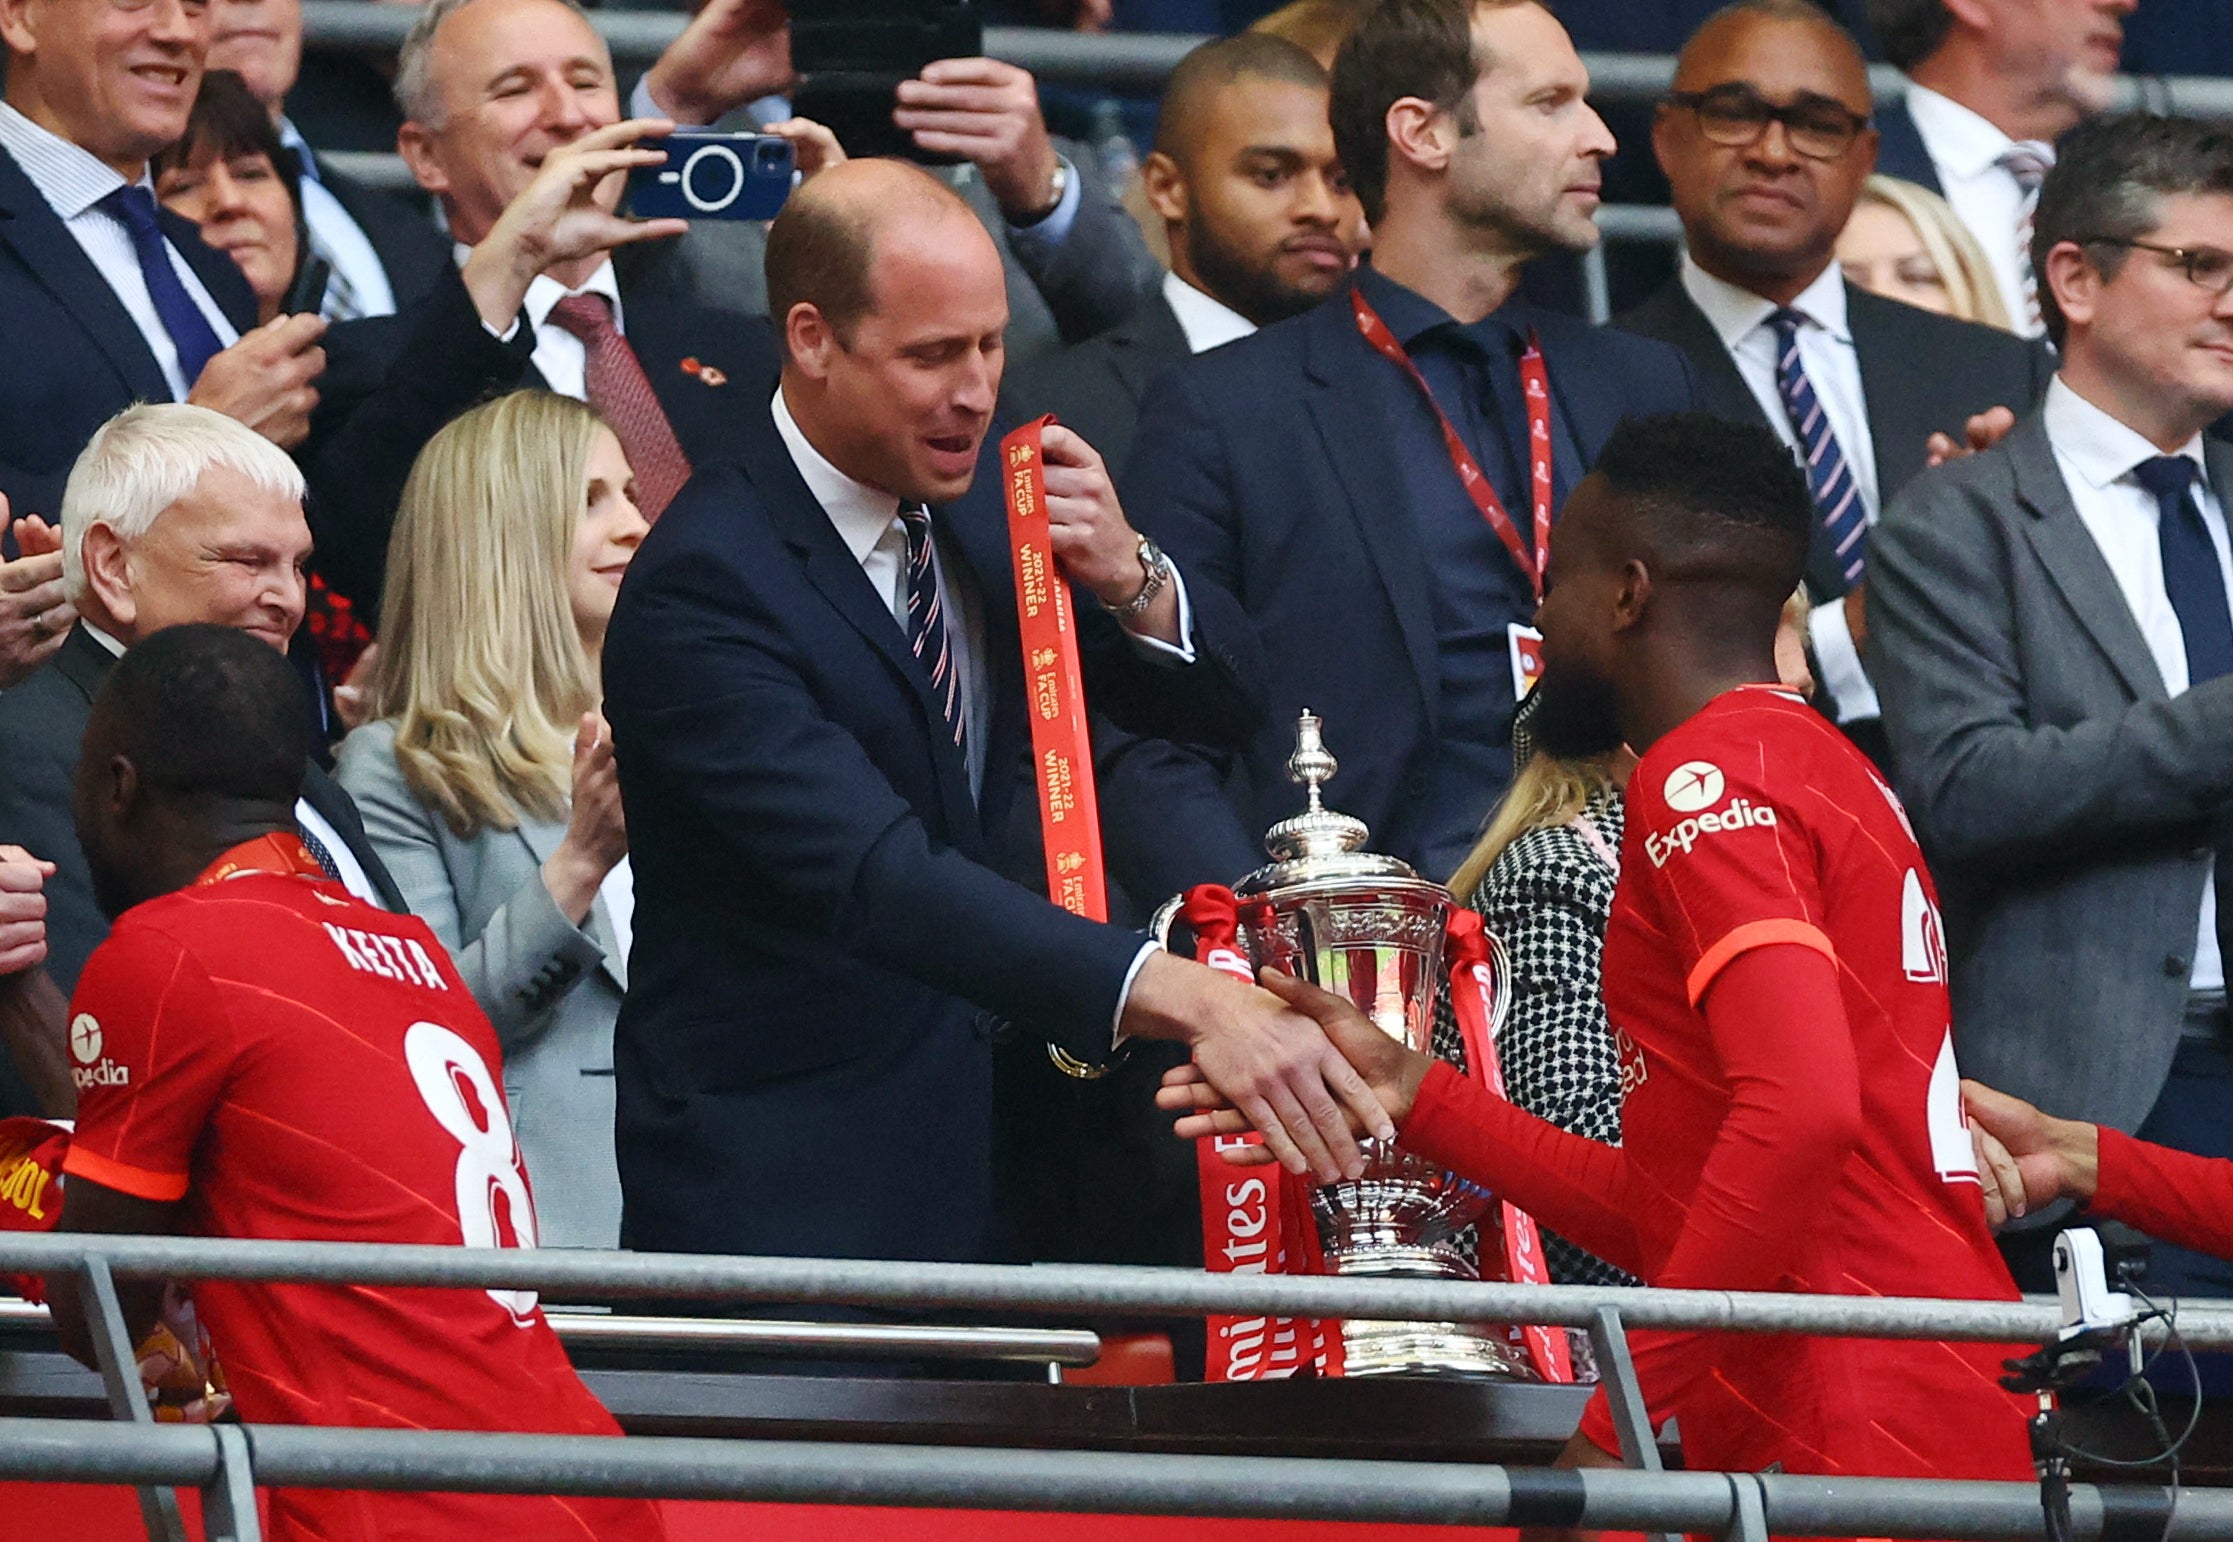 Prince William to attend FA Cup final tomorrow